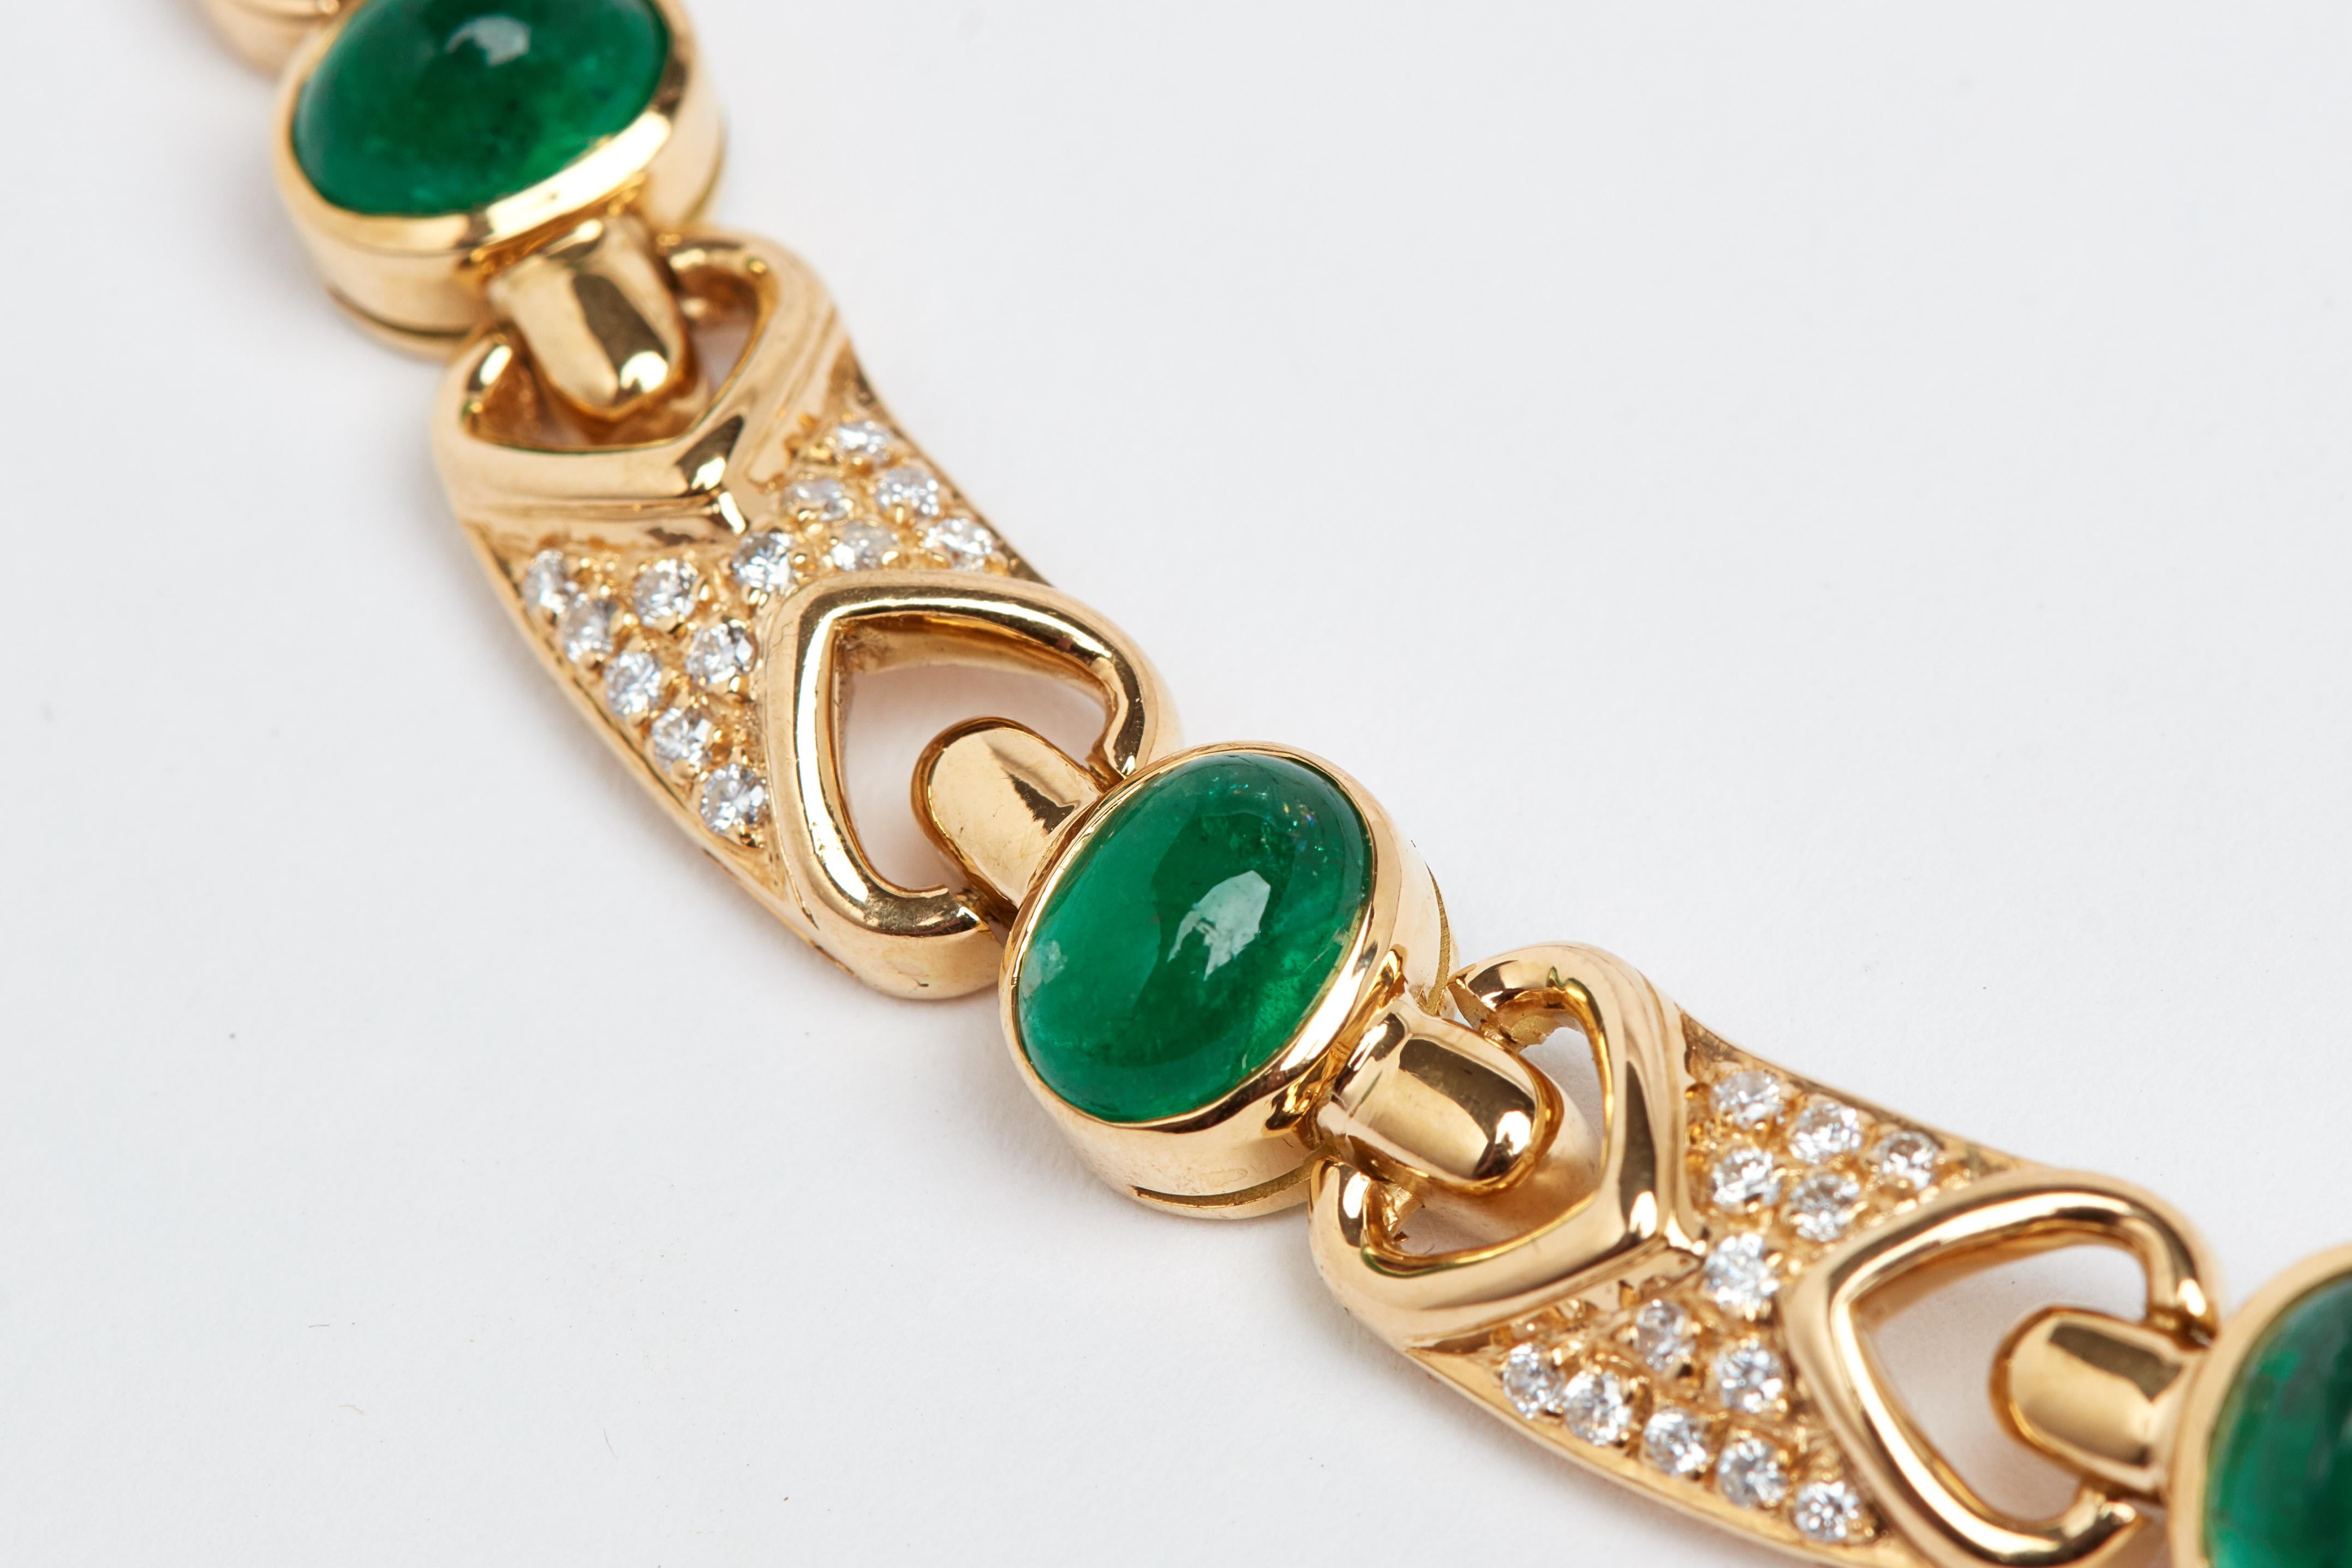 18K yellow gold cabochon emerald and diamond necklace. 15 oval cabochon emeralds weighing approximately 15 carats total. 182 white round diamonds weighing approximately 2 carats. 16 inches long. 